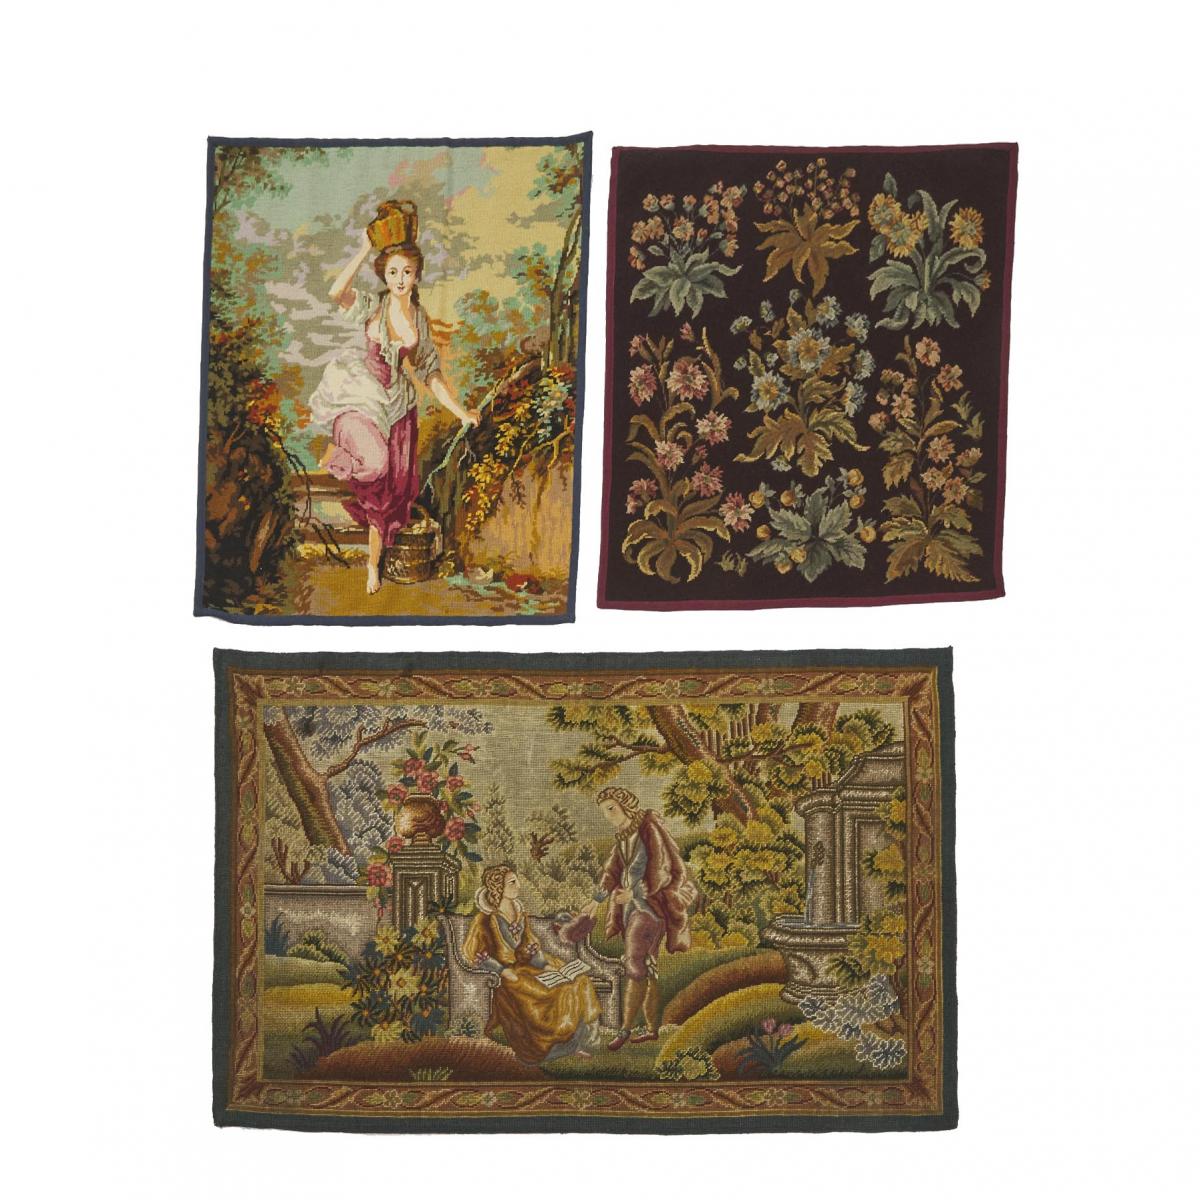 Three Continental Needlework Embroideries, 20th century, 2 ft 7 ins x 4 ft 1 ins — 0.8 m x 1.2 m; 2